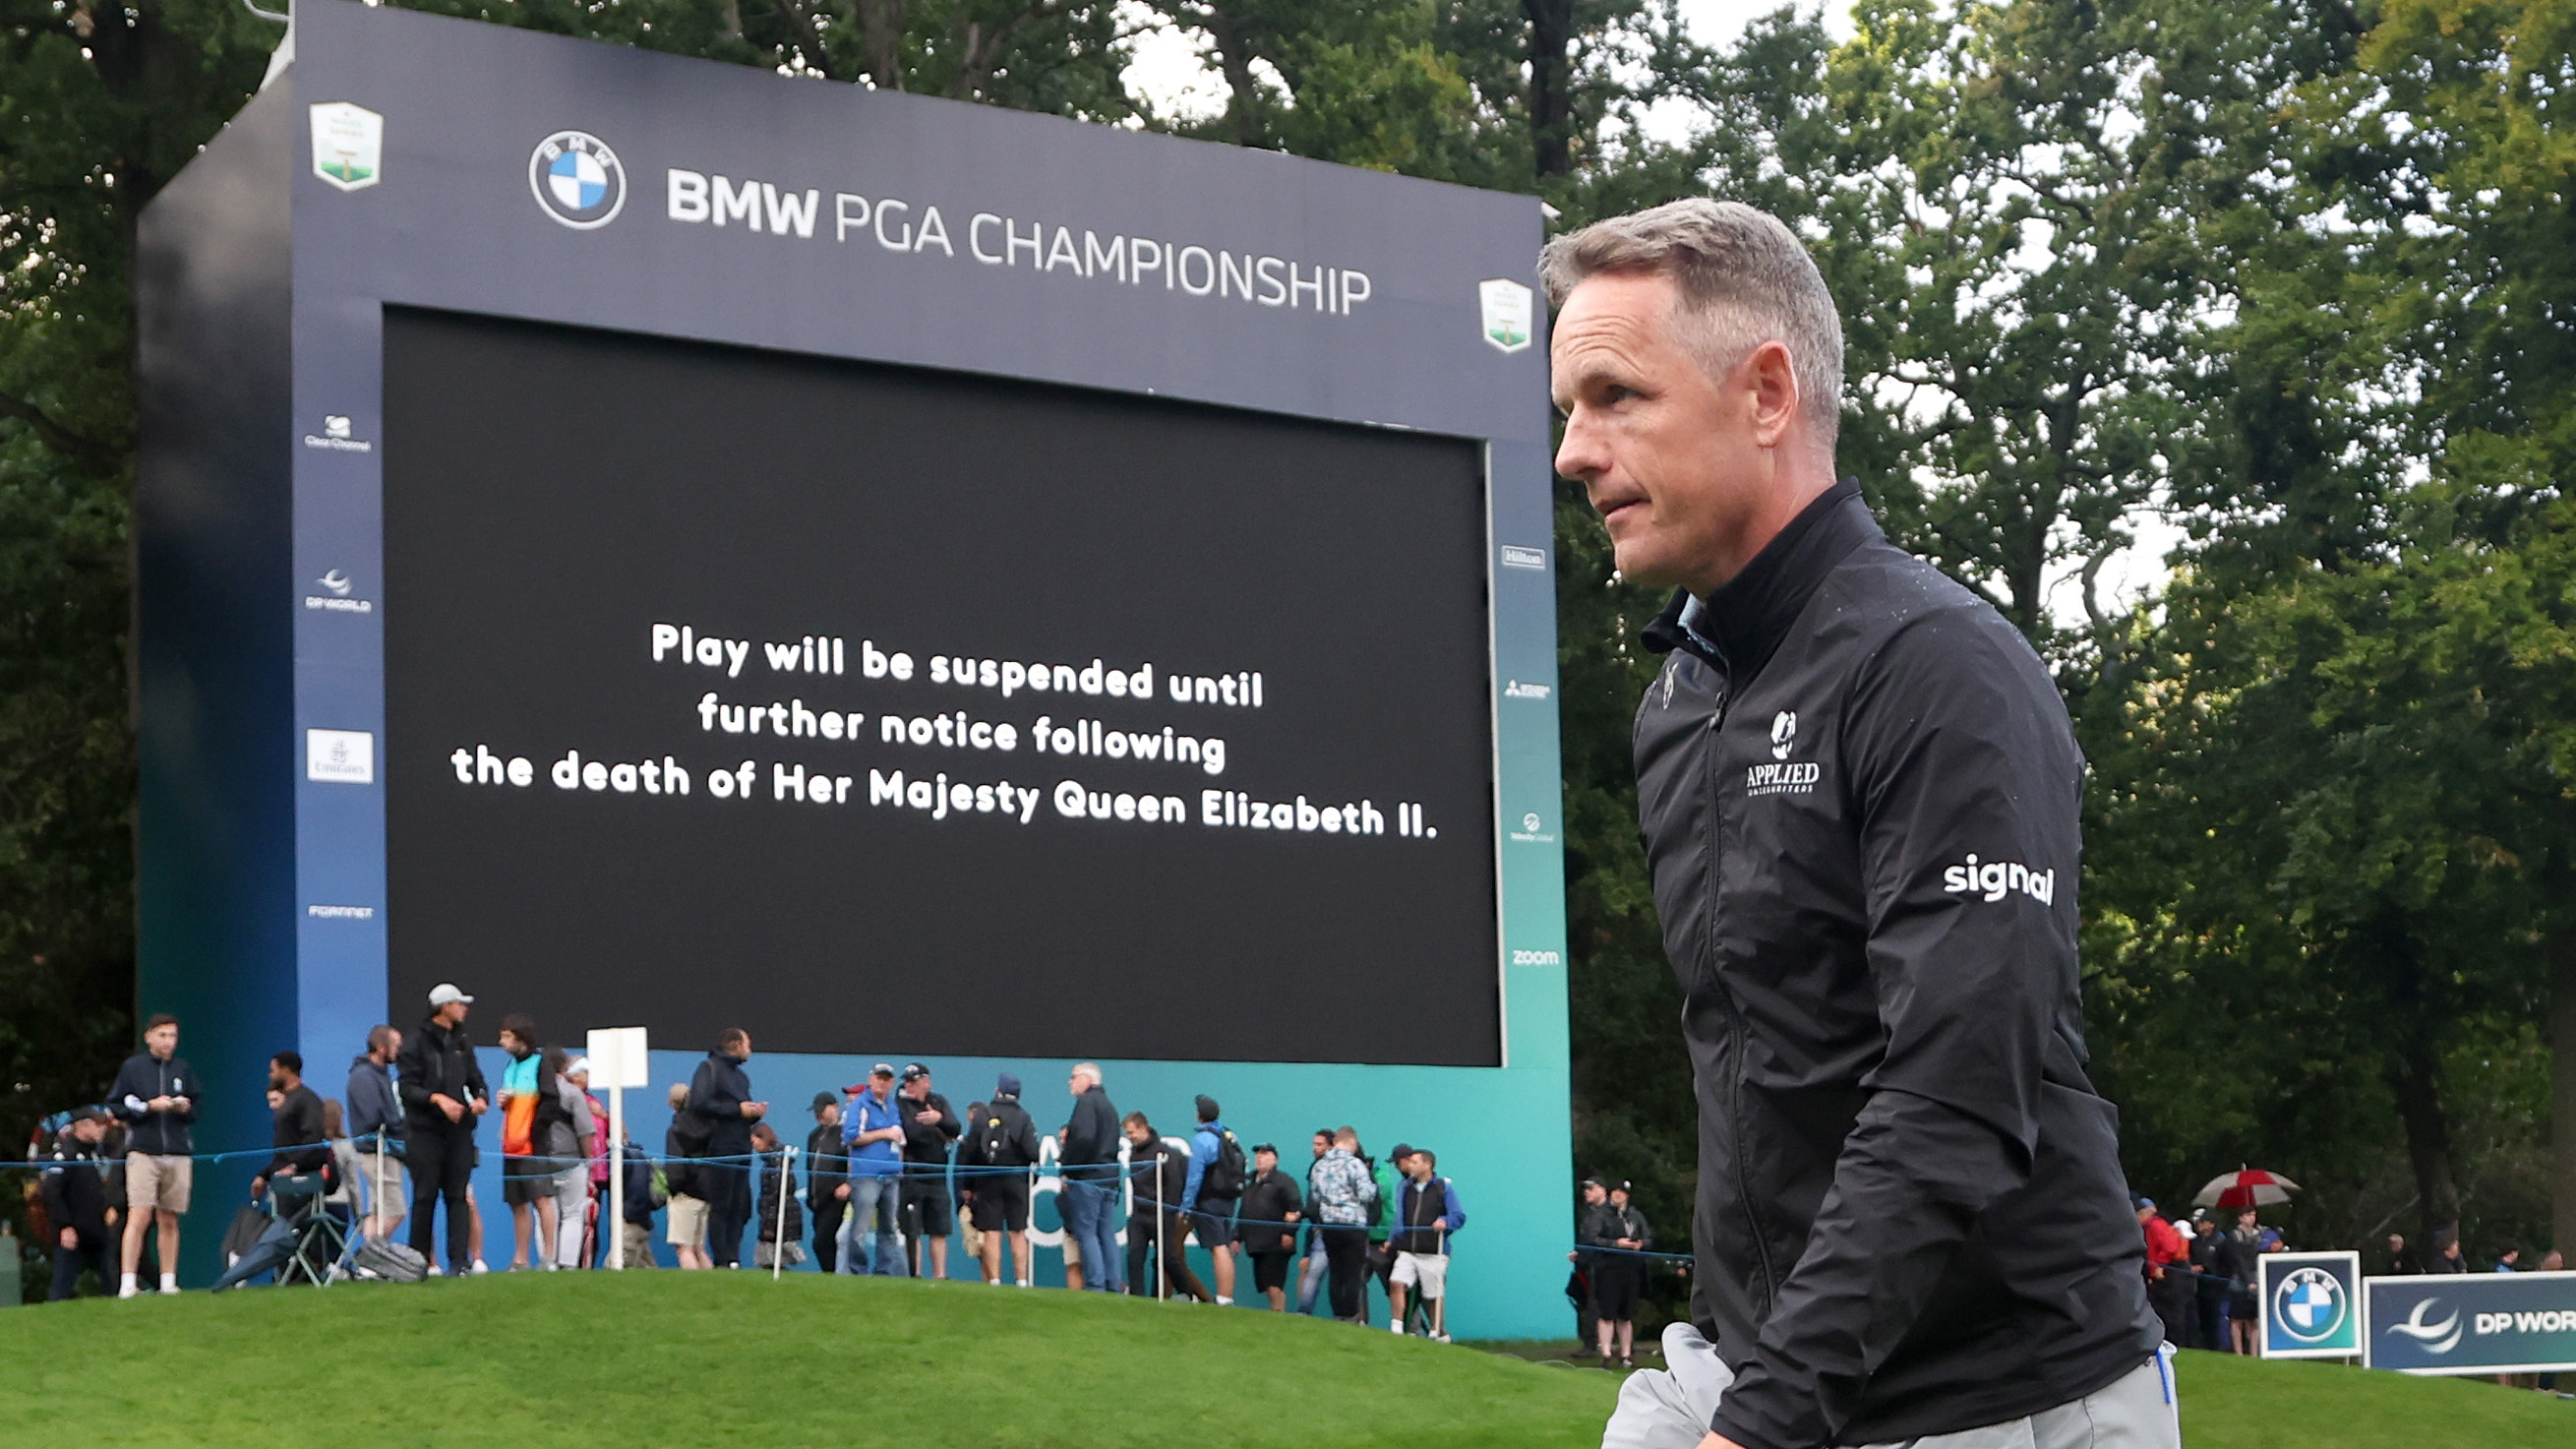 Luke Donald of England leaves the 18th green as play is suspended following the announcement of the death of Her Majesty Queen Elizabeth II during Day One of the BMW PGA Championship at Wentworth Golf Club on September 08, 2022 in Virginia Water, England. (Photo by Warren Little/Getty Images)